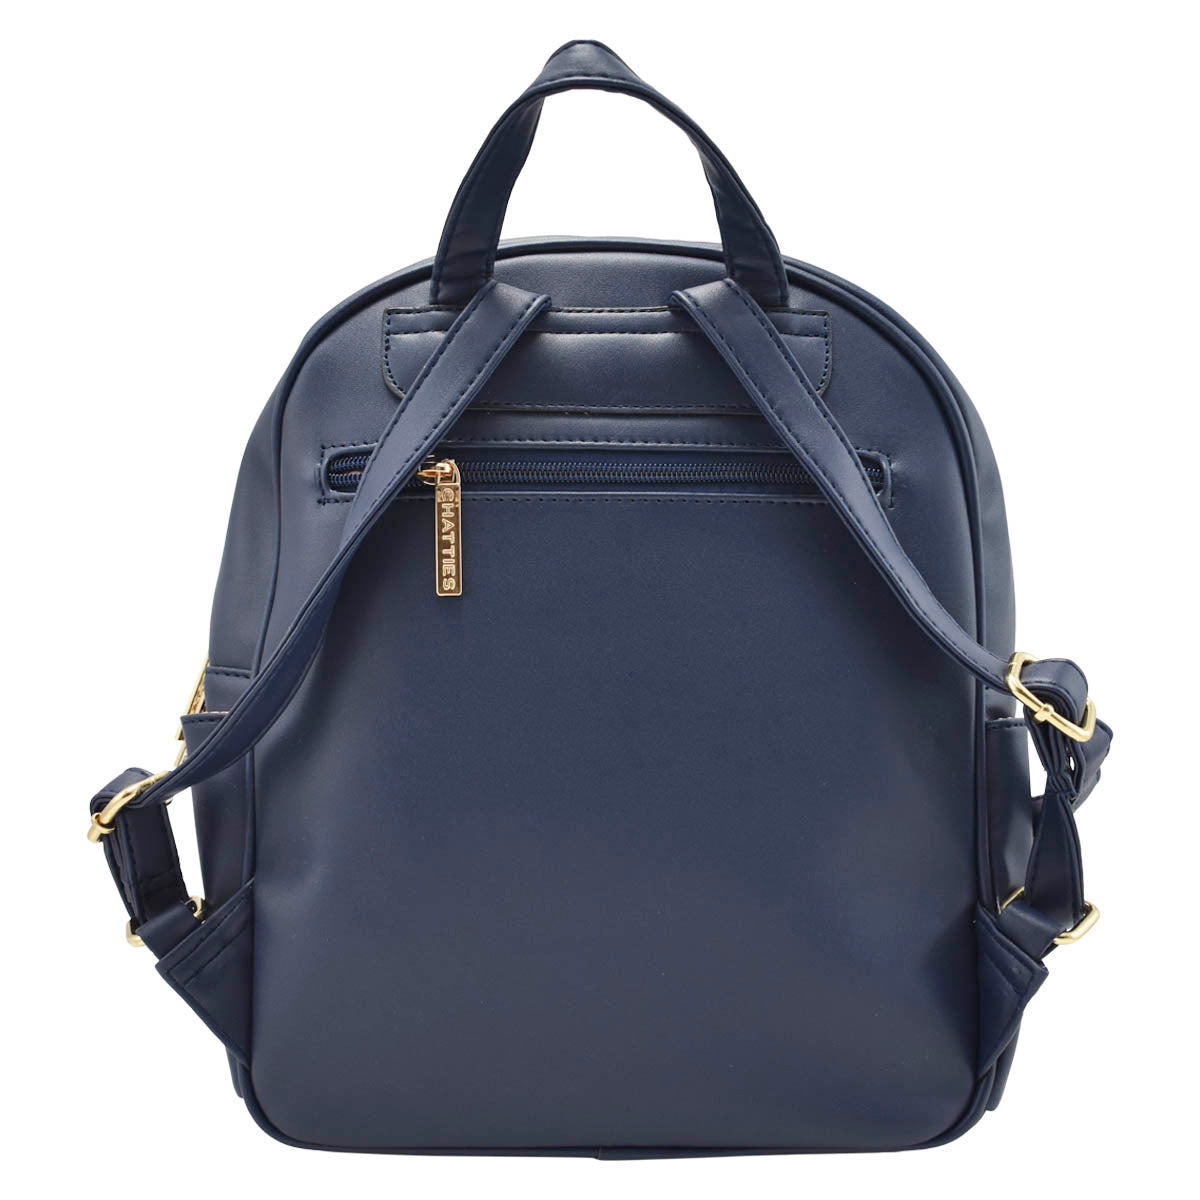 Mochila Backpack Flores Navy Chatties